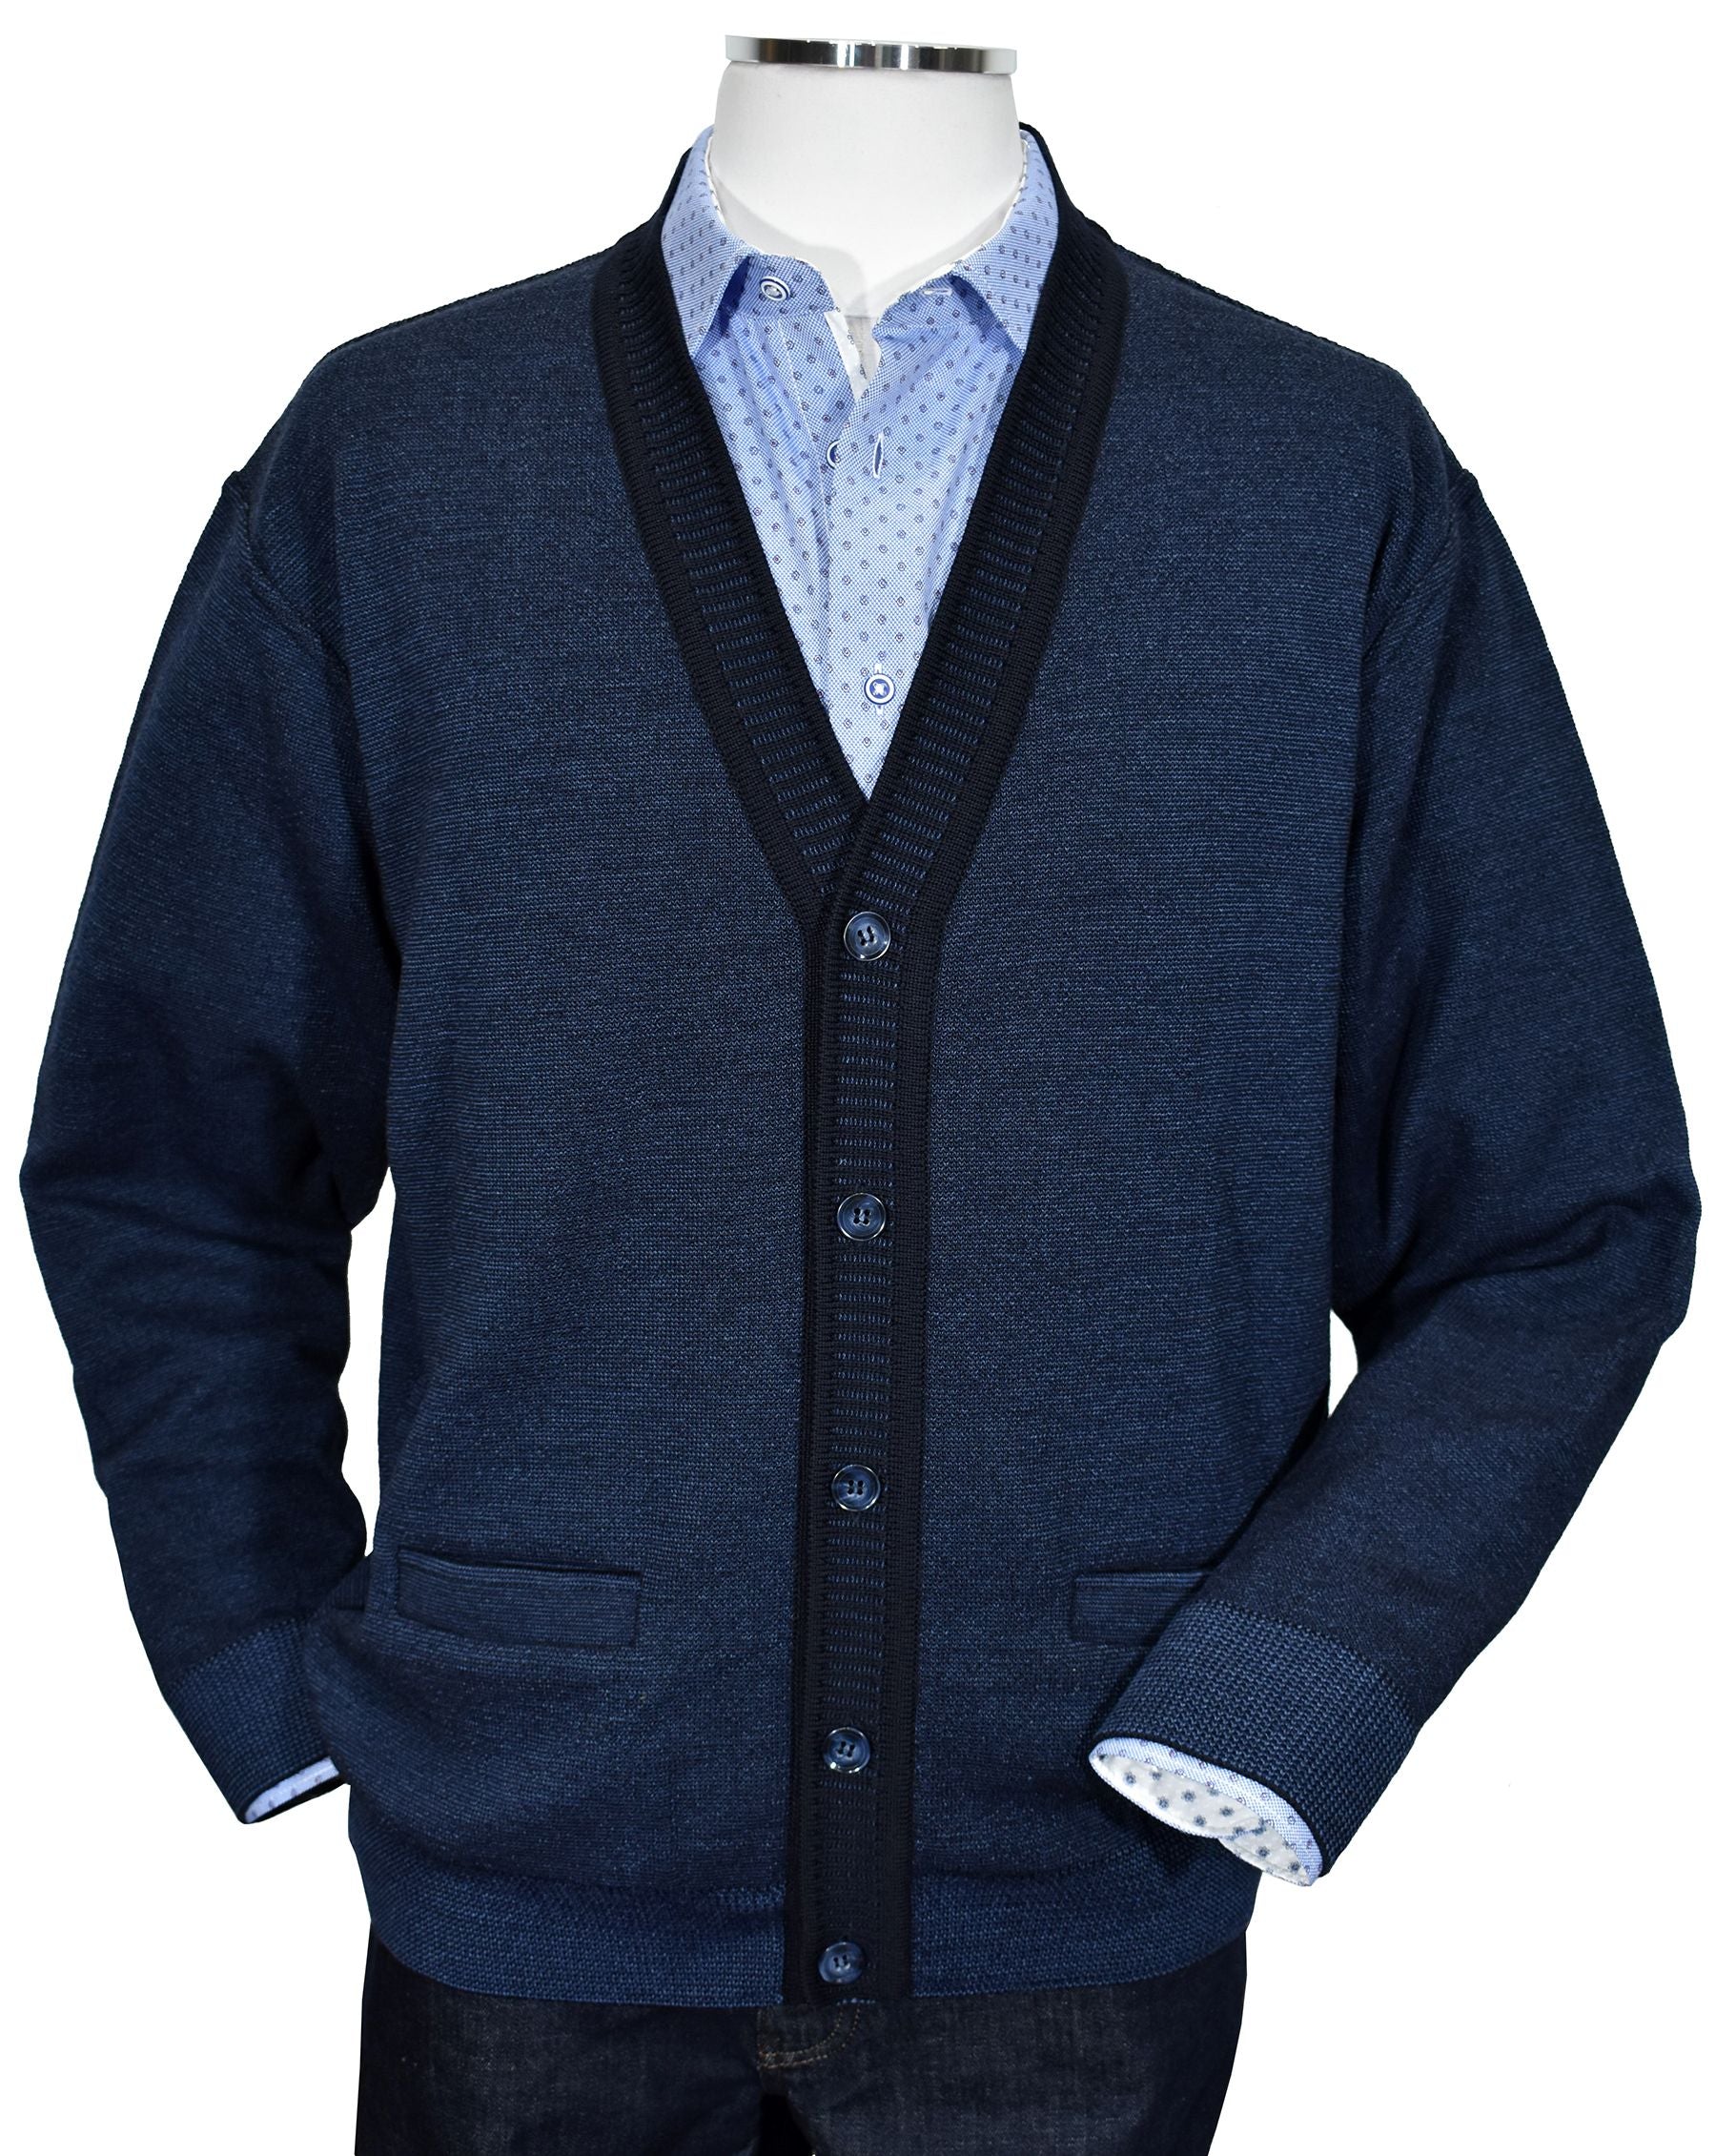 Exclusively Marcello, the classic cardigan model in rich indigo melange with a fashion edge detailing in contrast color. The perfect layering piece utilized for comfort and style. Light to medium weight. Soft Italian merino wool blend.  Matched buttons.  Classic fit.